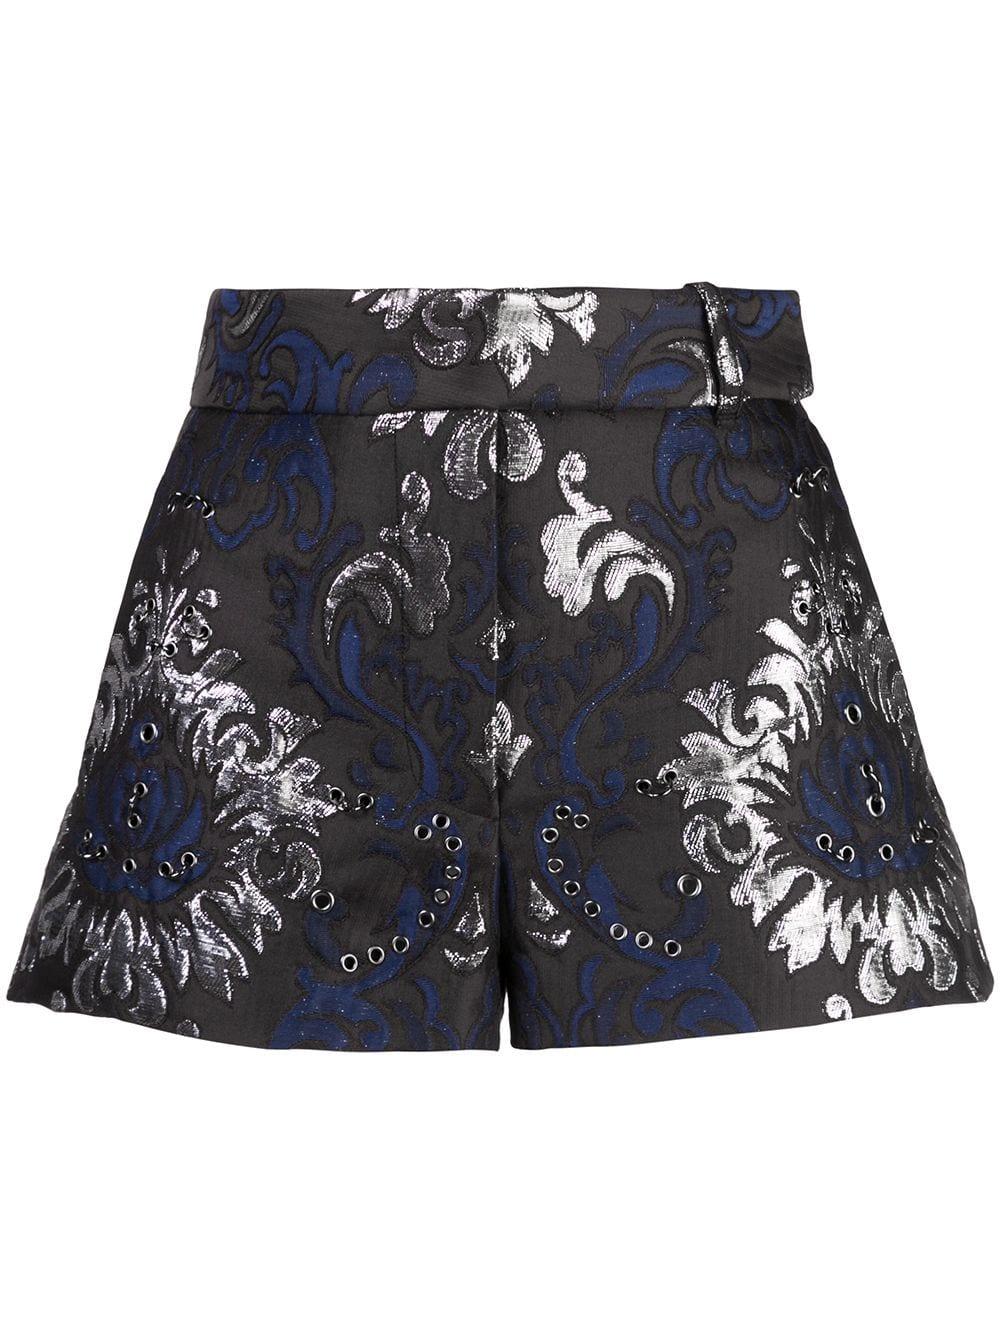 Vera Wang Grommeted Embroidered Shorts in Black - Lyst